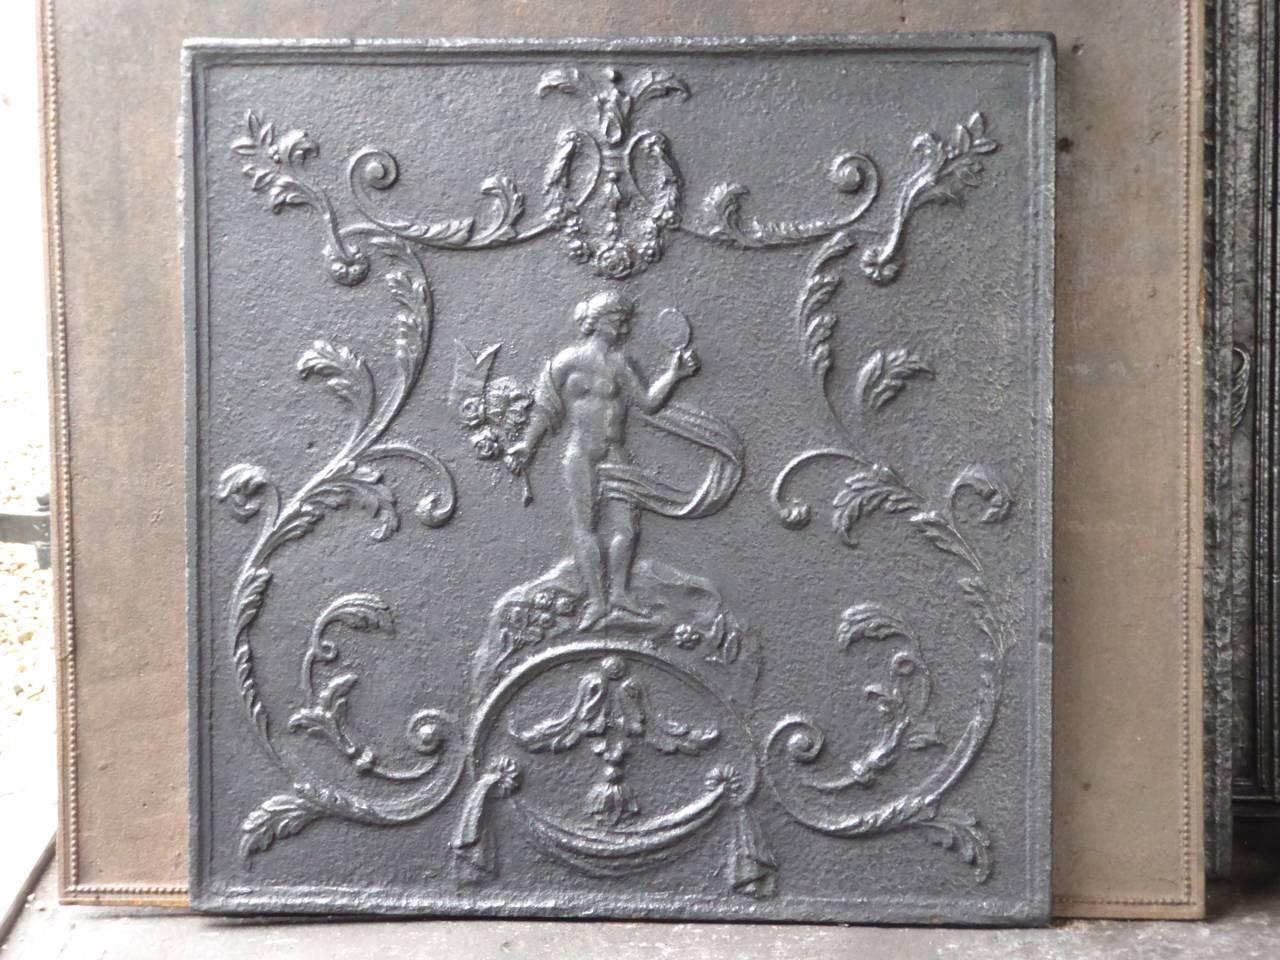 18th century French fireback with the goddess Venus. Venus is holding her mirror and a bunch of flowers. Goddess of love, beauty and fertility.

The fireback is made of cast iron and has a black / pewter patina. The condition is good, no